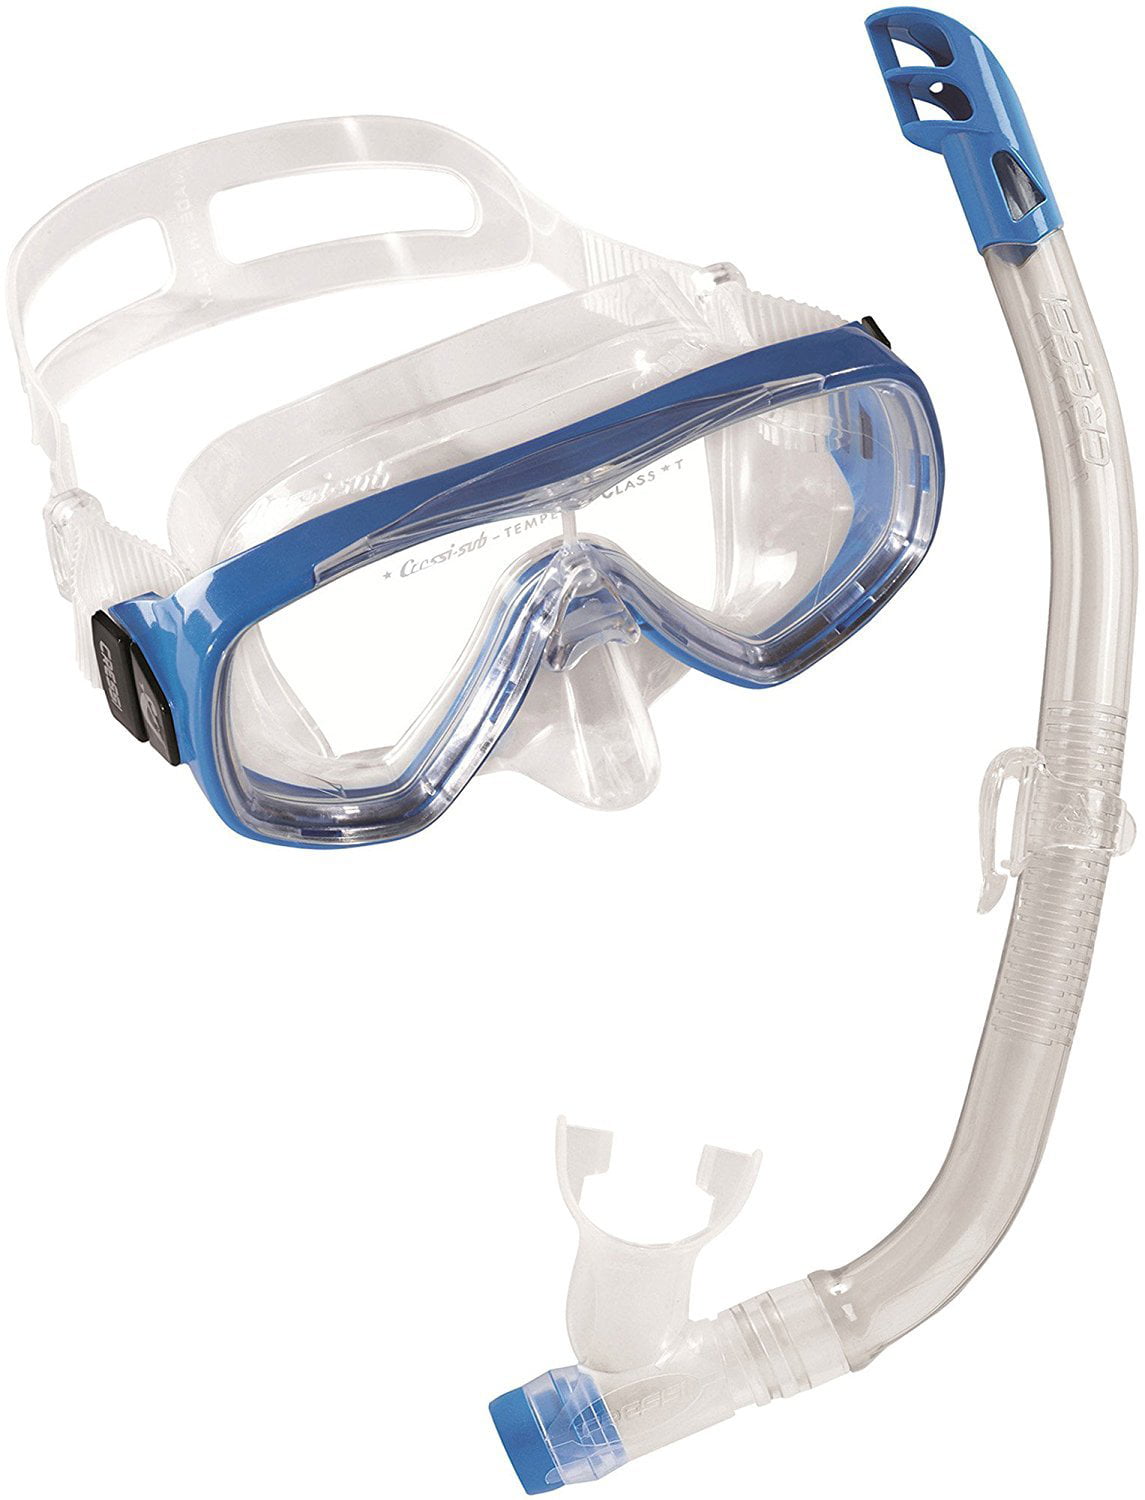 Cressi Junior Ondina Snorkeling Mask Clear/Blue by Cressi Made in Italy